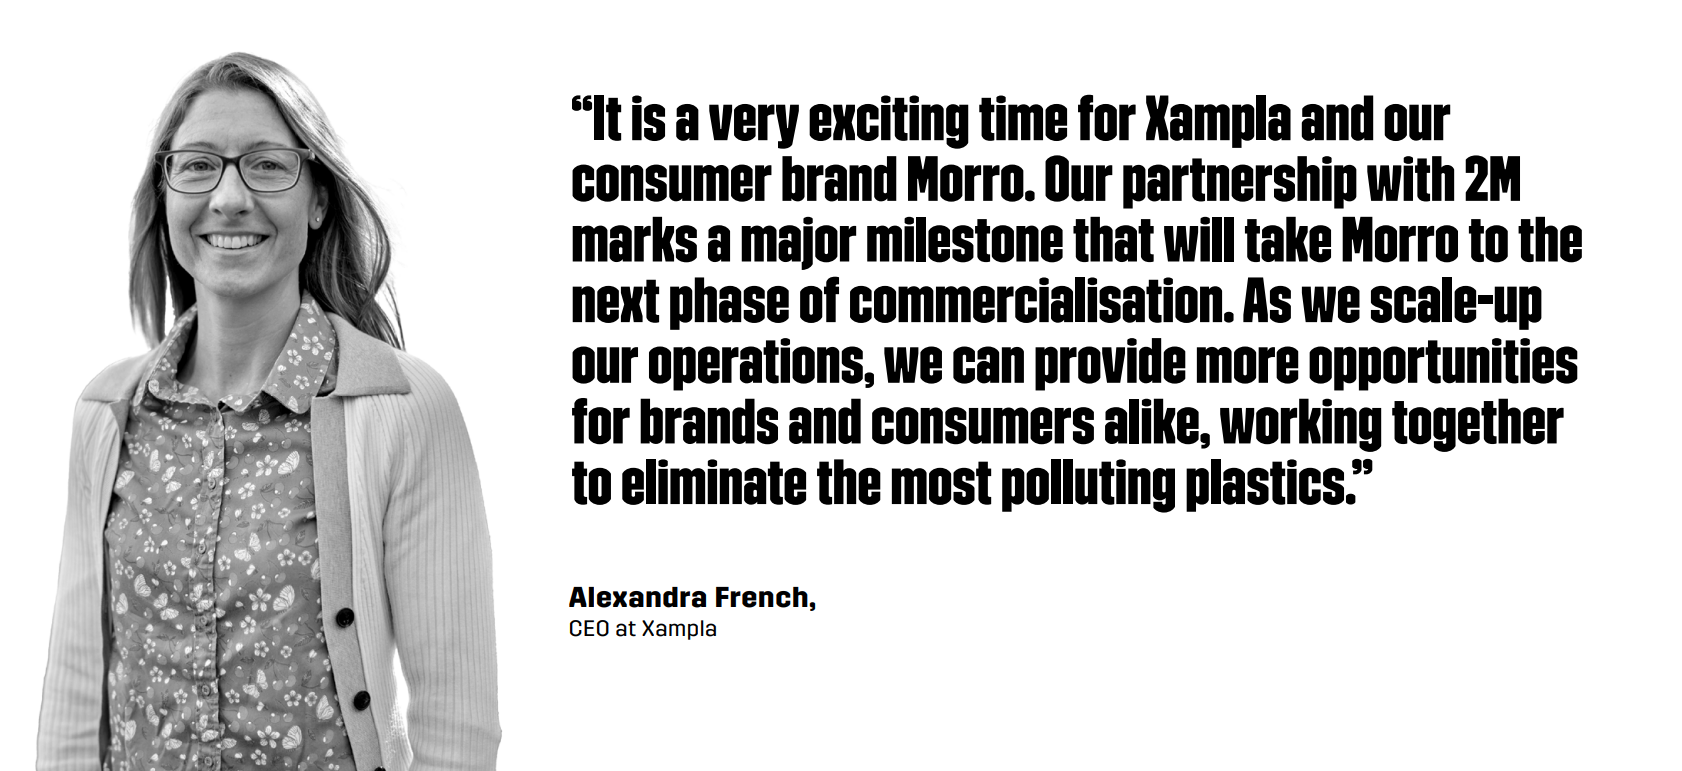 “It is a very exciting time for Xampla and our consumer brand Morro. Our partnership with 2M marks a major milestone that will take Morro to the next phase of commercialisation,” stated Alexandra French, CEO at Xampla. “As we scale-up our operations, we can provide more opportunities for brands and consumers alike, working together to eliminate the most polluting plastics.”